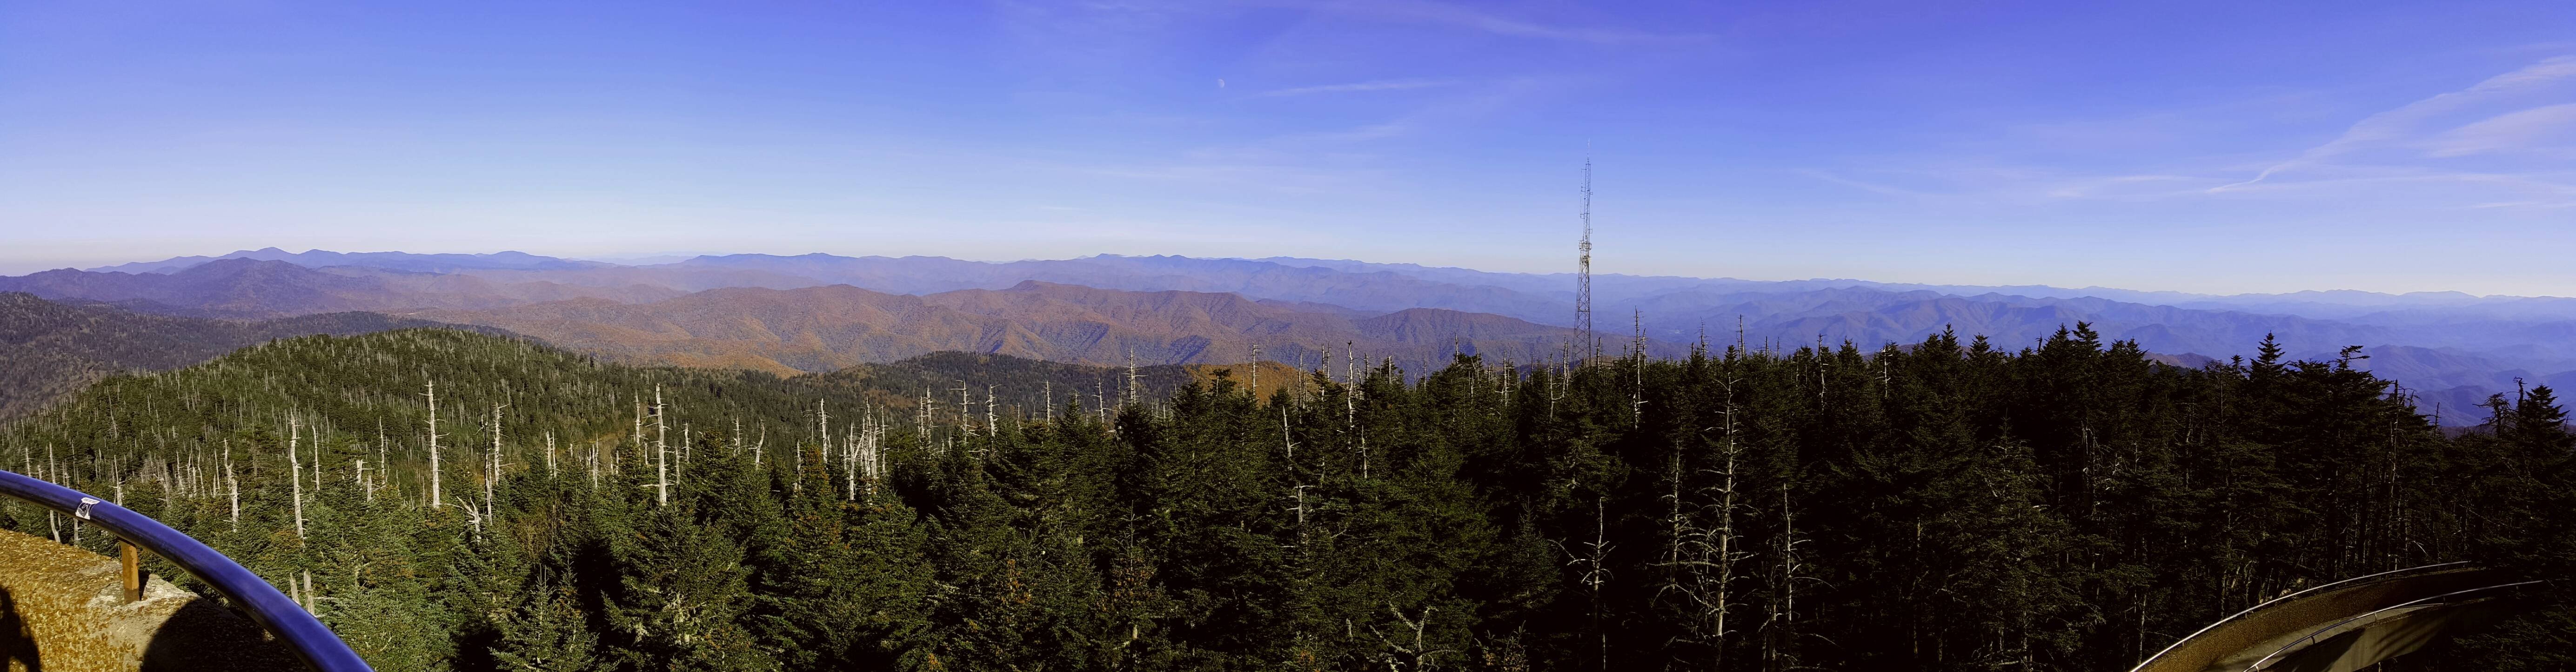 View From Clingmans Dome In The Great Smoky Mountains - HD Wallpaper 